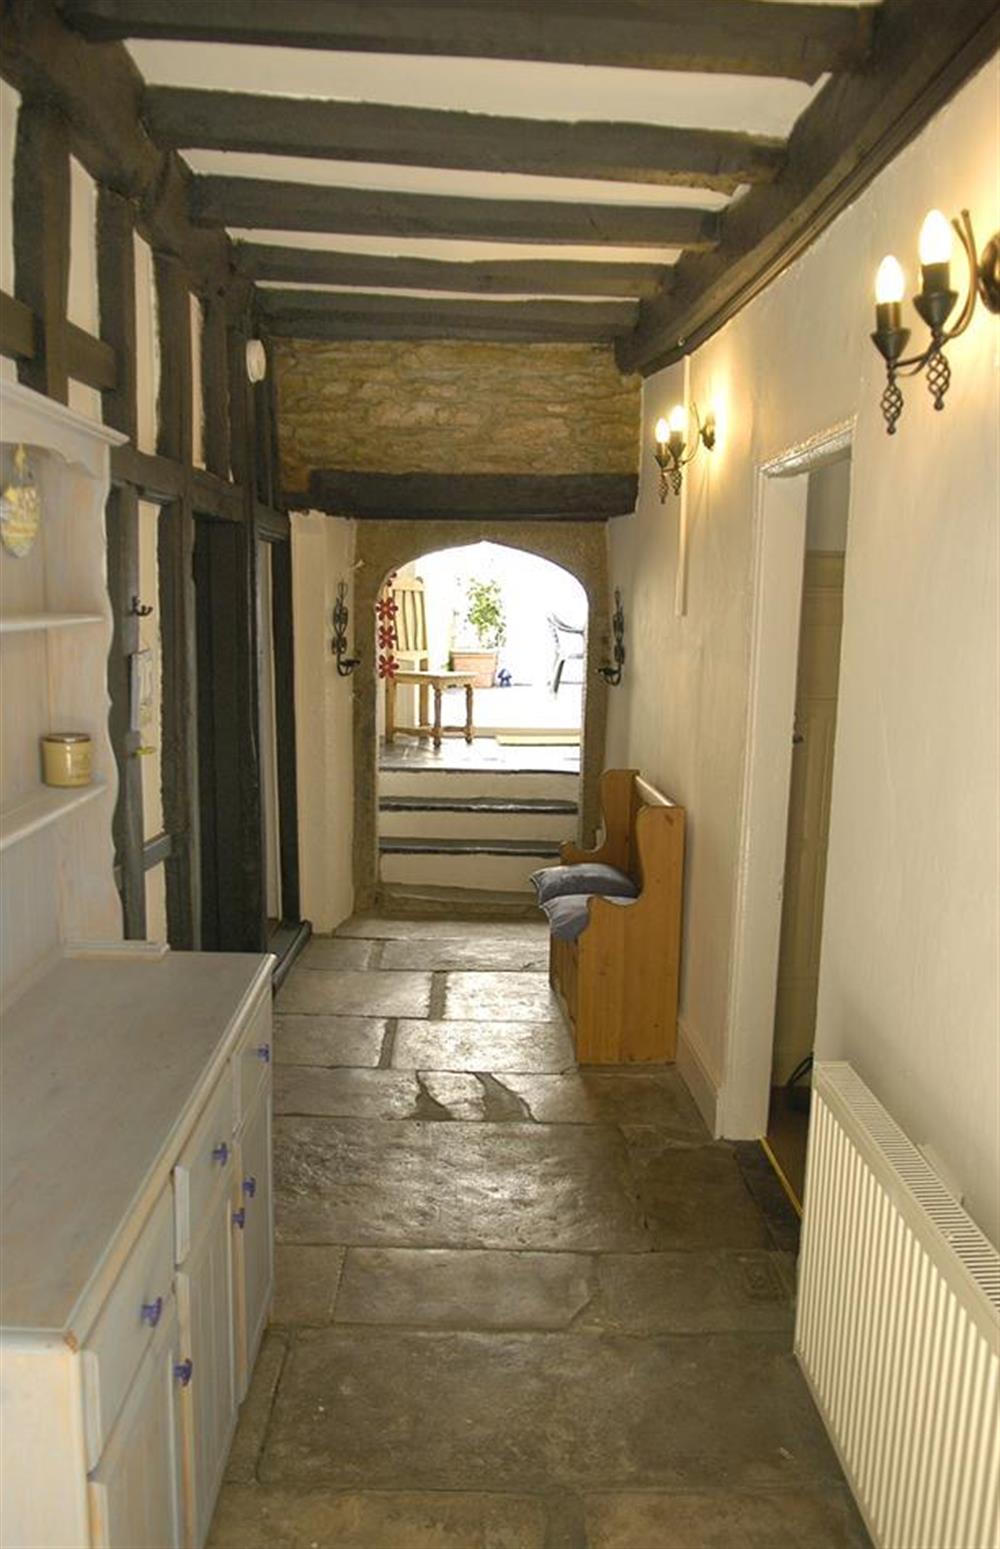 The entrance hallway looking through to the rear courtyard at Church House, Looe